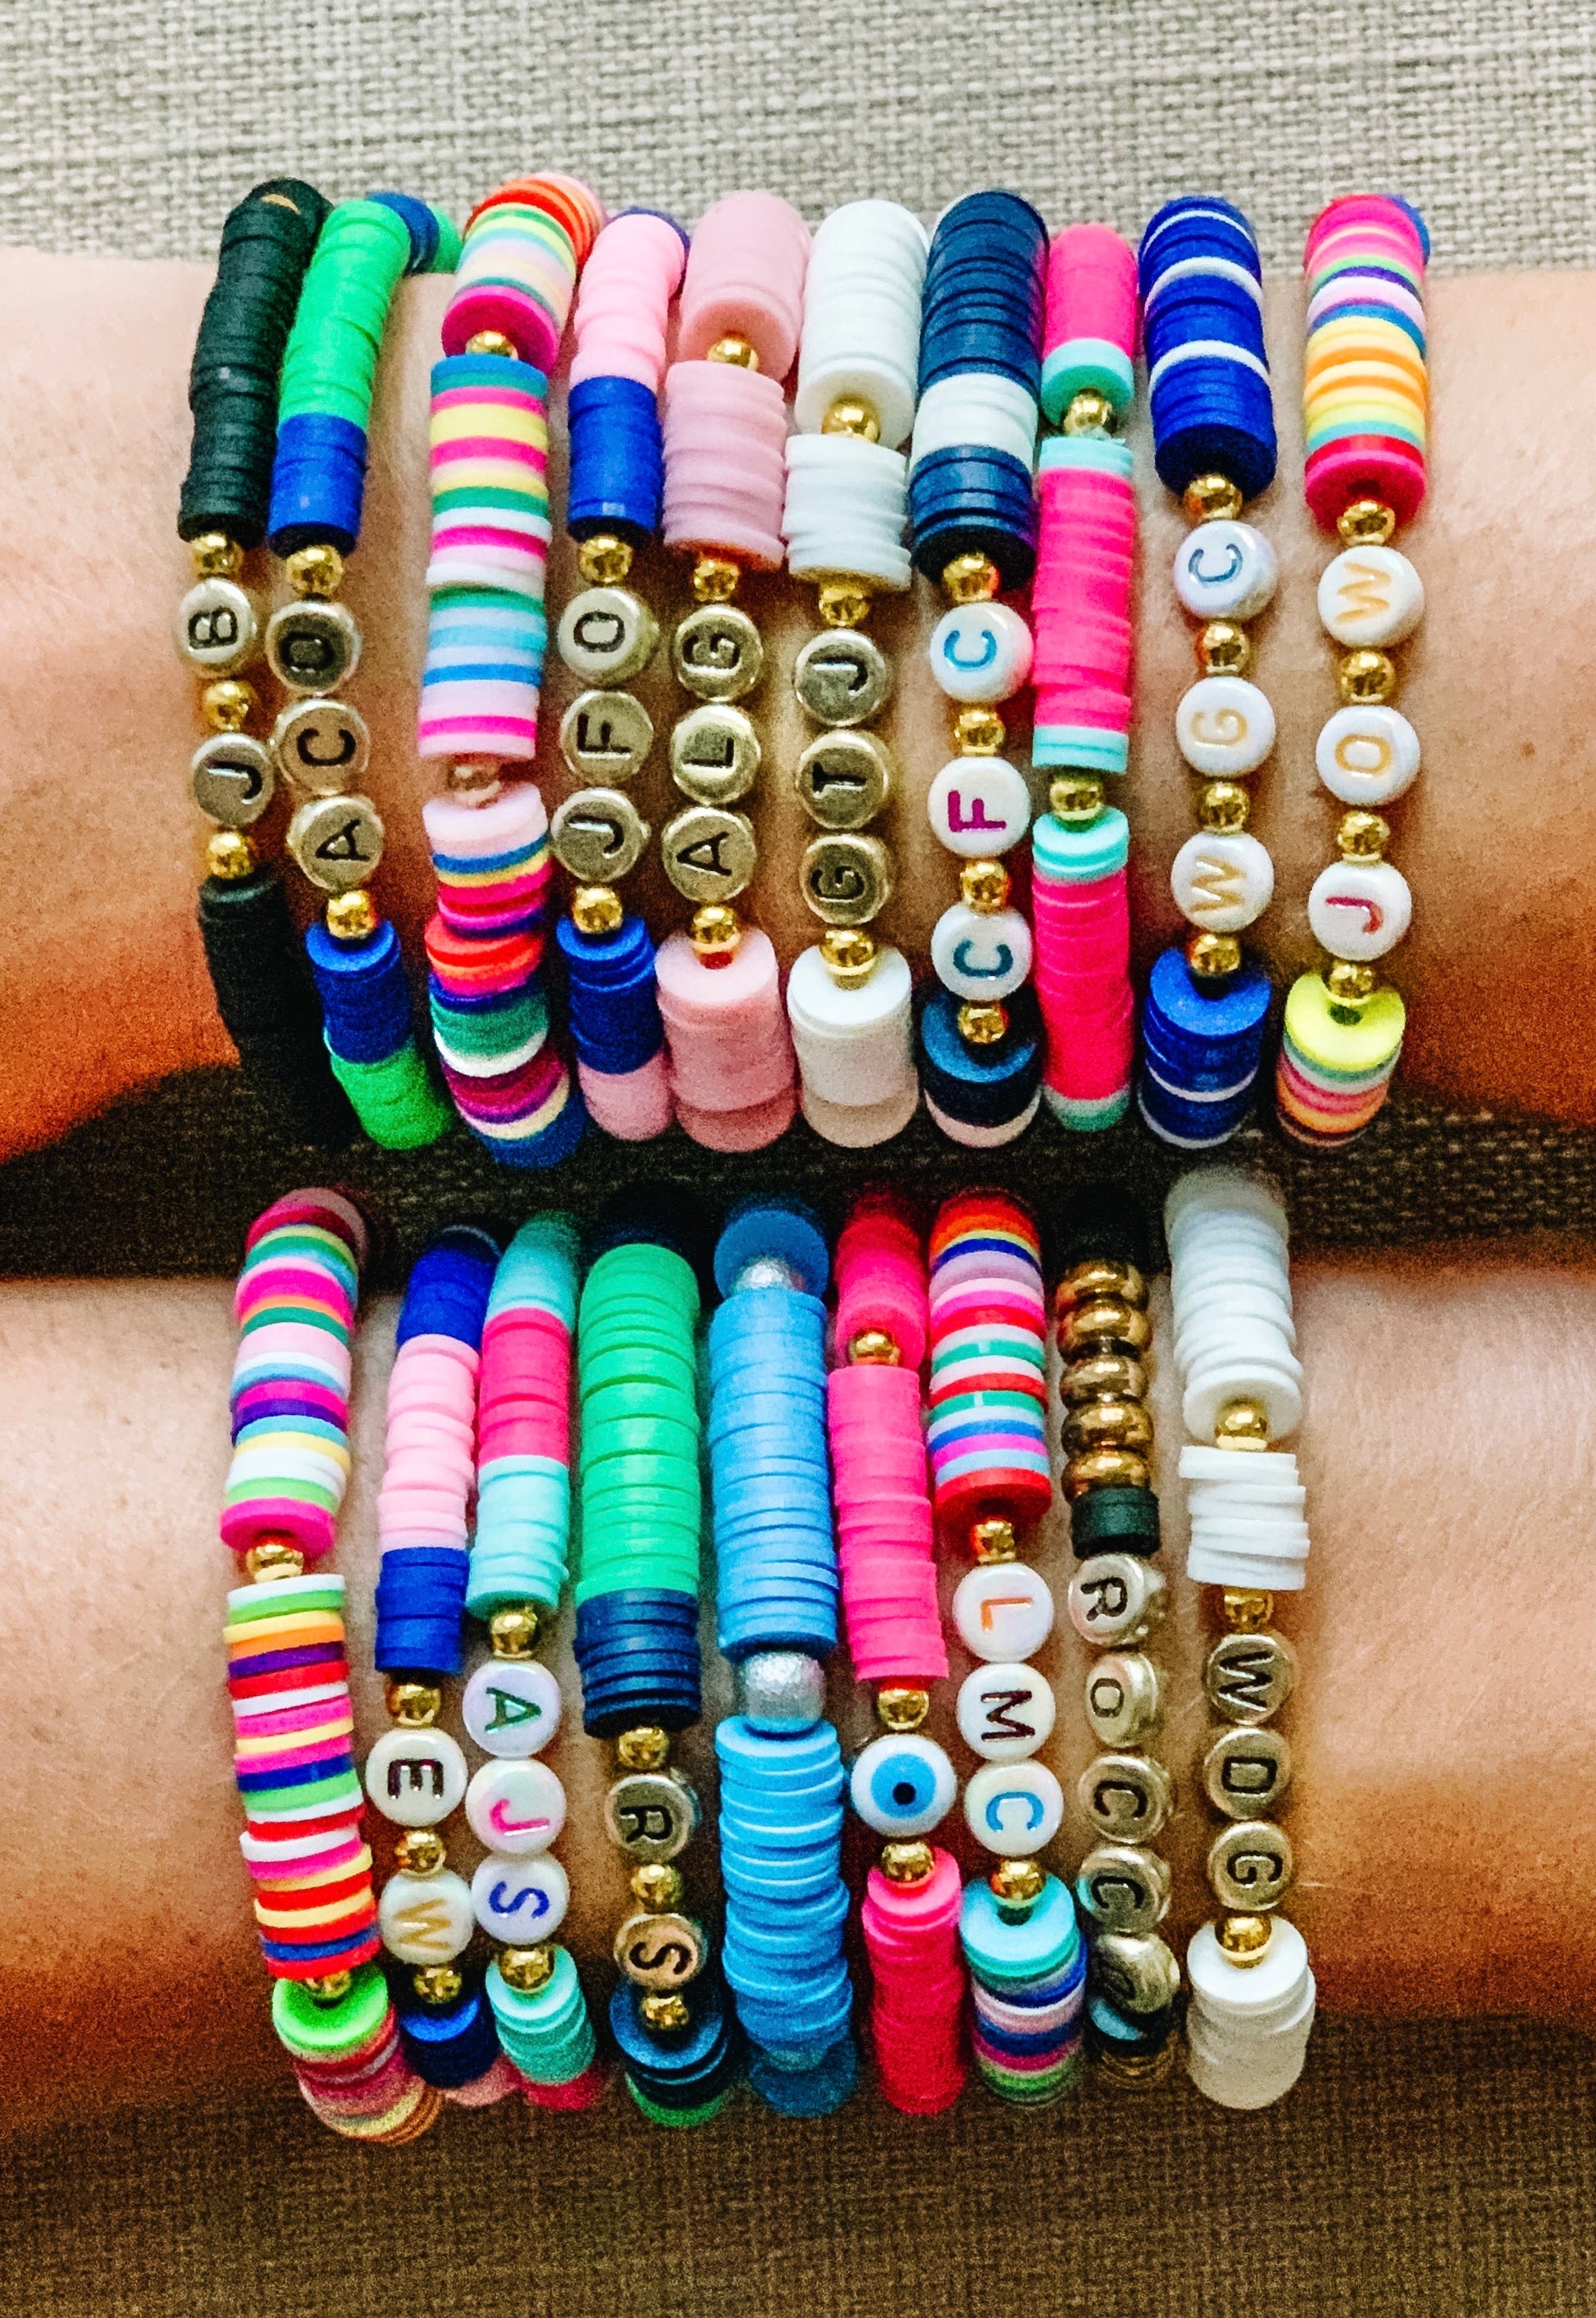 Initial Clay Beads Bracelets